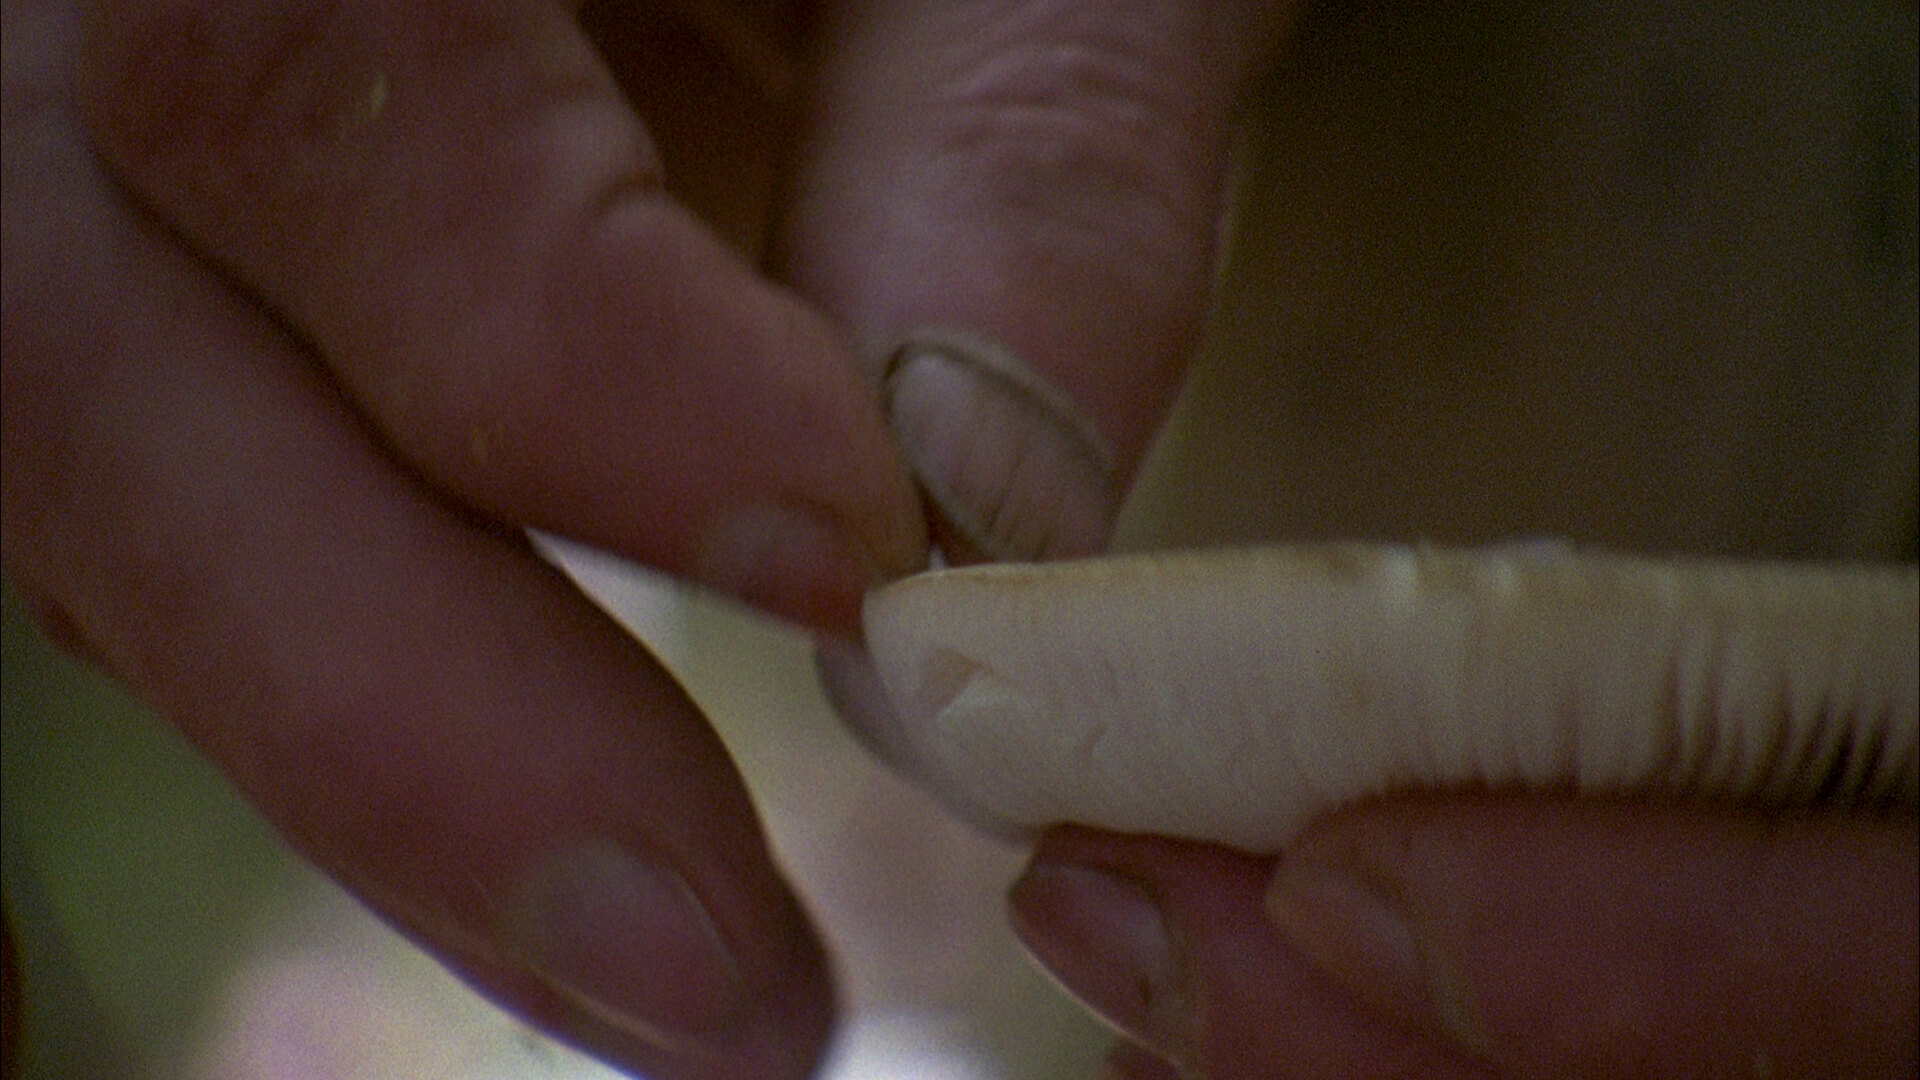 Still from The Vanquishing of the Witch Baba Yaga. Close-up of hands picking at a small white object. Color photograph.